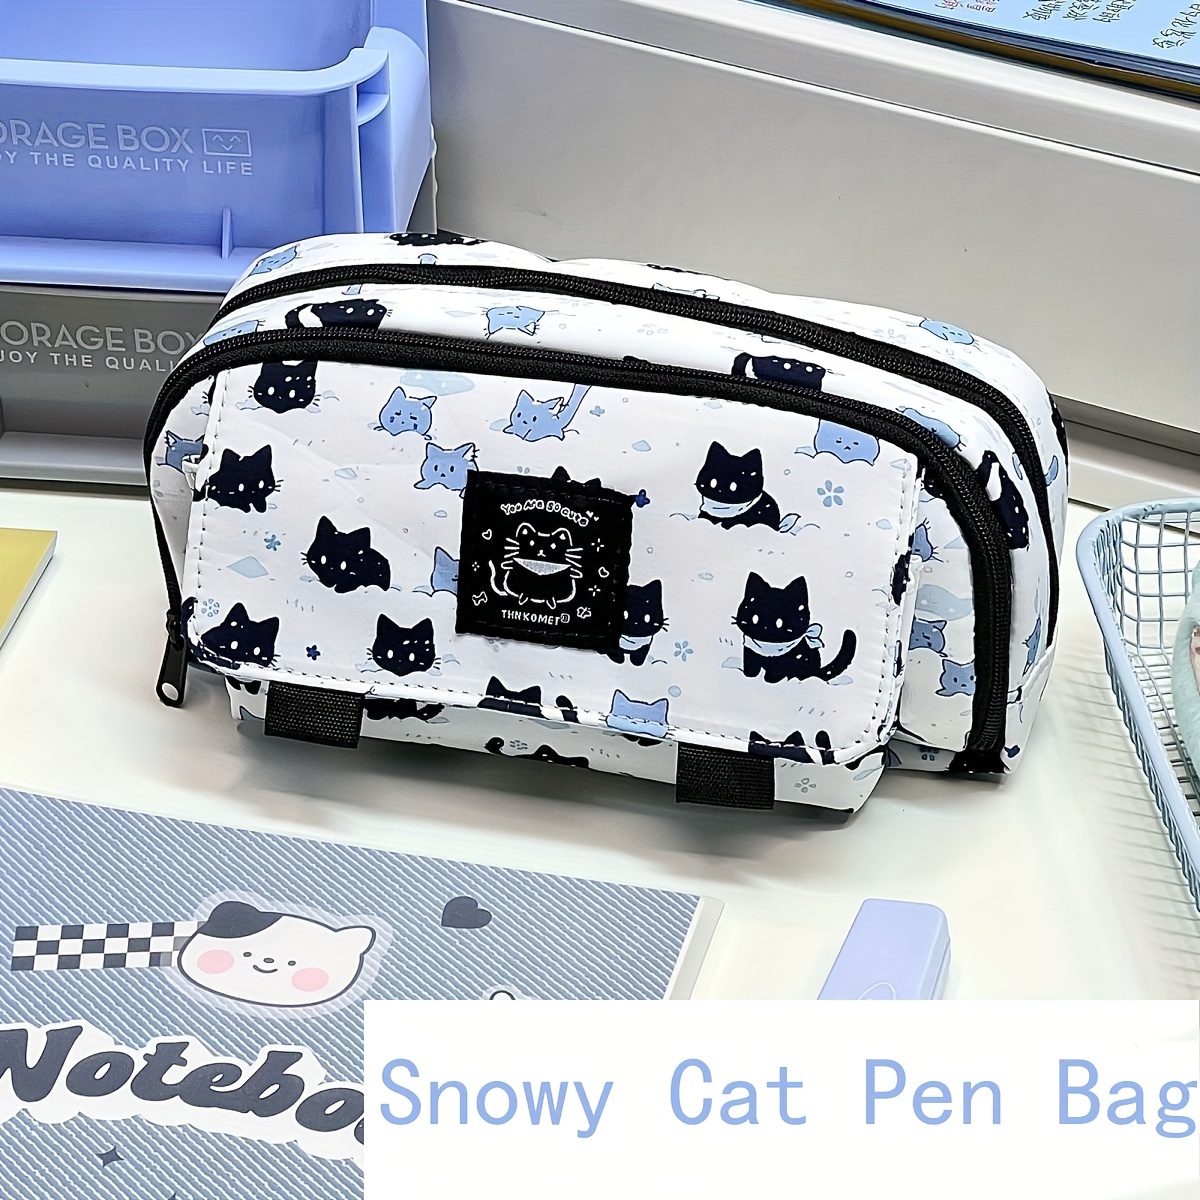 

Polyester Double-layer Pencil Case - Snowy Cat Print, Multi-functional With Transparent Mesh Bag, School Stationery Organizer